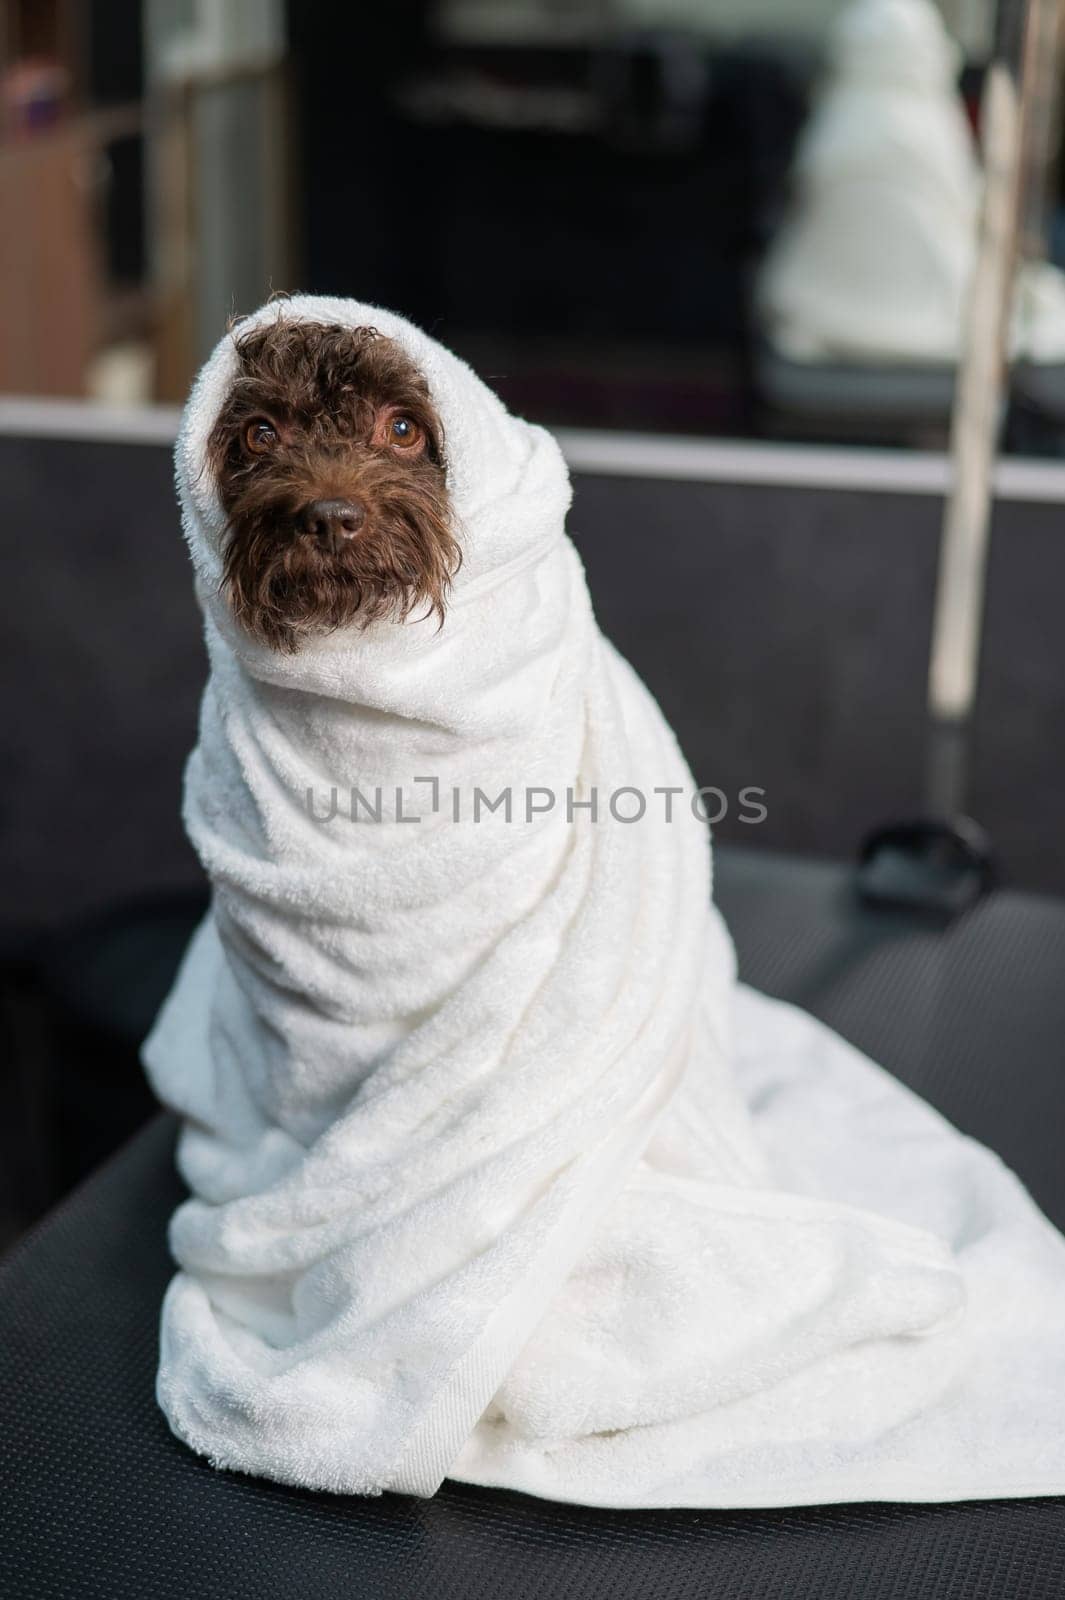 Cute brown mini poodle wrapped in a white towel after washing in a grooming salon. by mrwed54